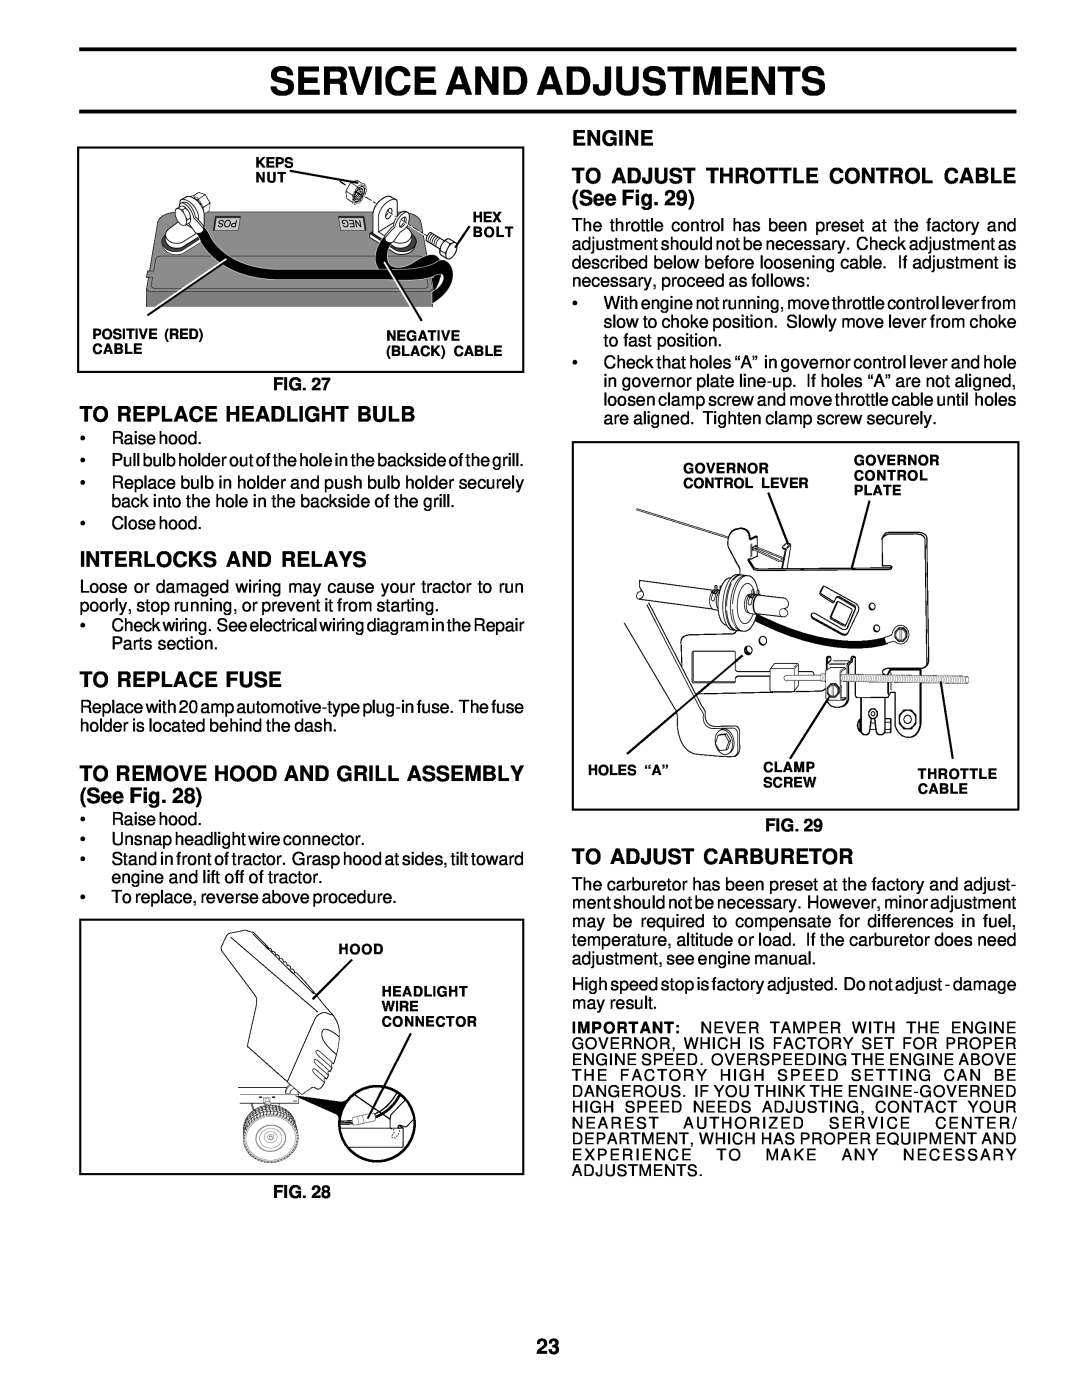 Weed Eater 177677 owner manual To Replace Headlight Bulb, Interlocks And Relays, To Replace Fuse, To Adjust Carburetor 